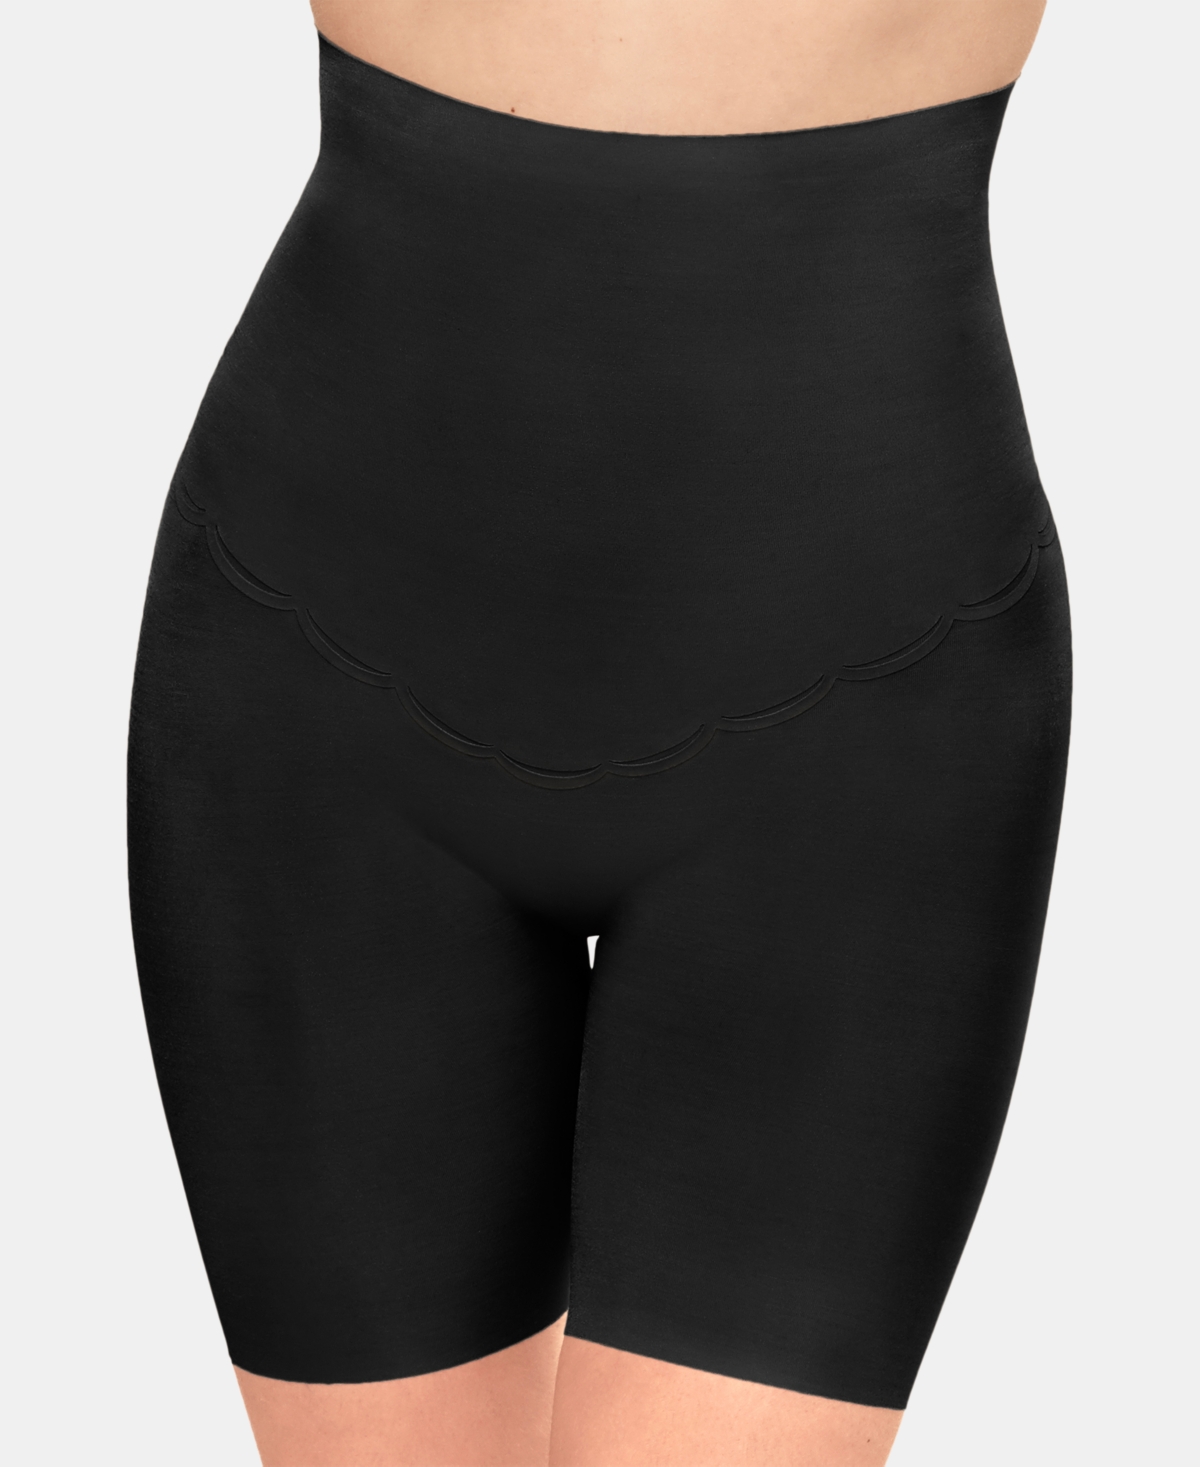 UPC 719544847049 product image for Wacoal Women's Inside Edit Firm Tummy-Control High Waist Thigh Slimmer 808307 | upcitemdb.com